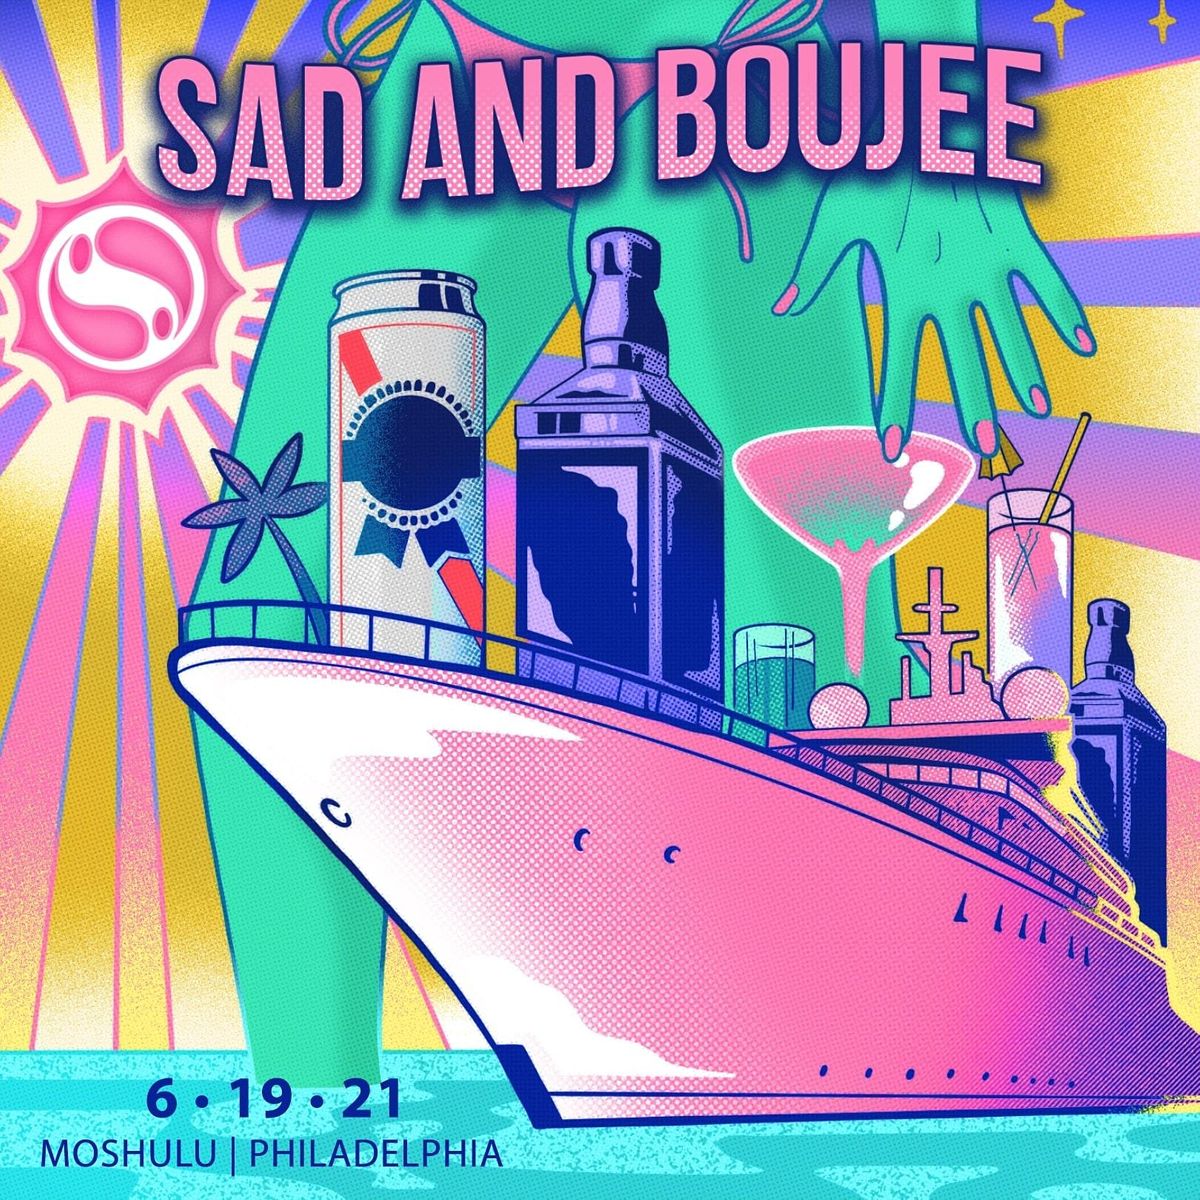 Sad & Boujee - Emo + Trap Party! at The Moshulu